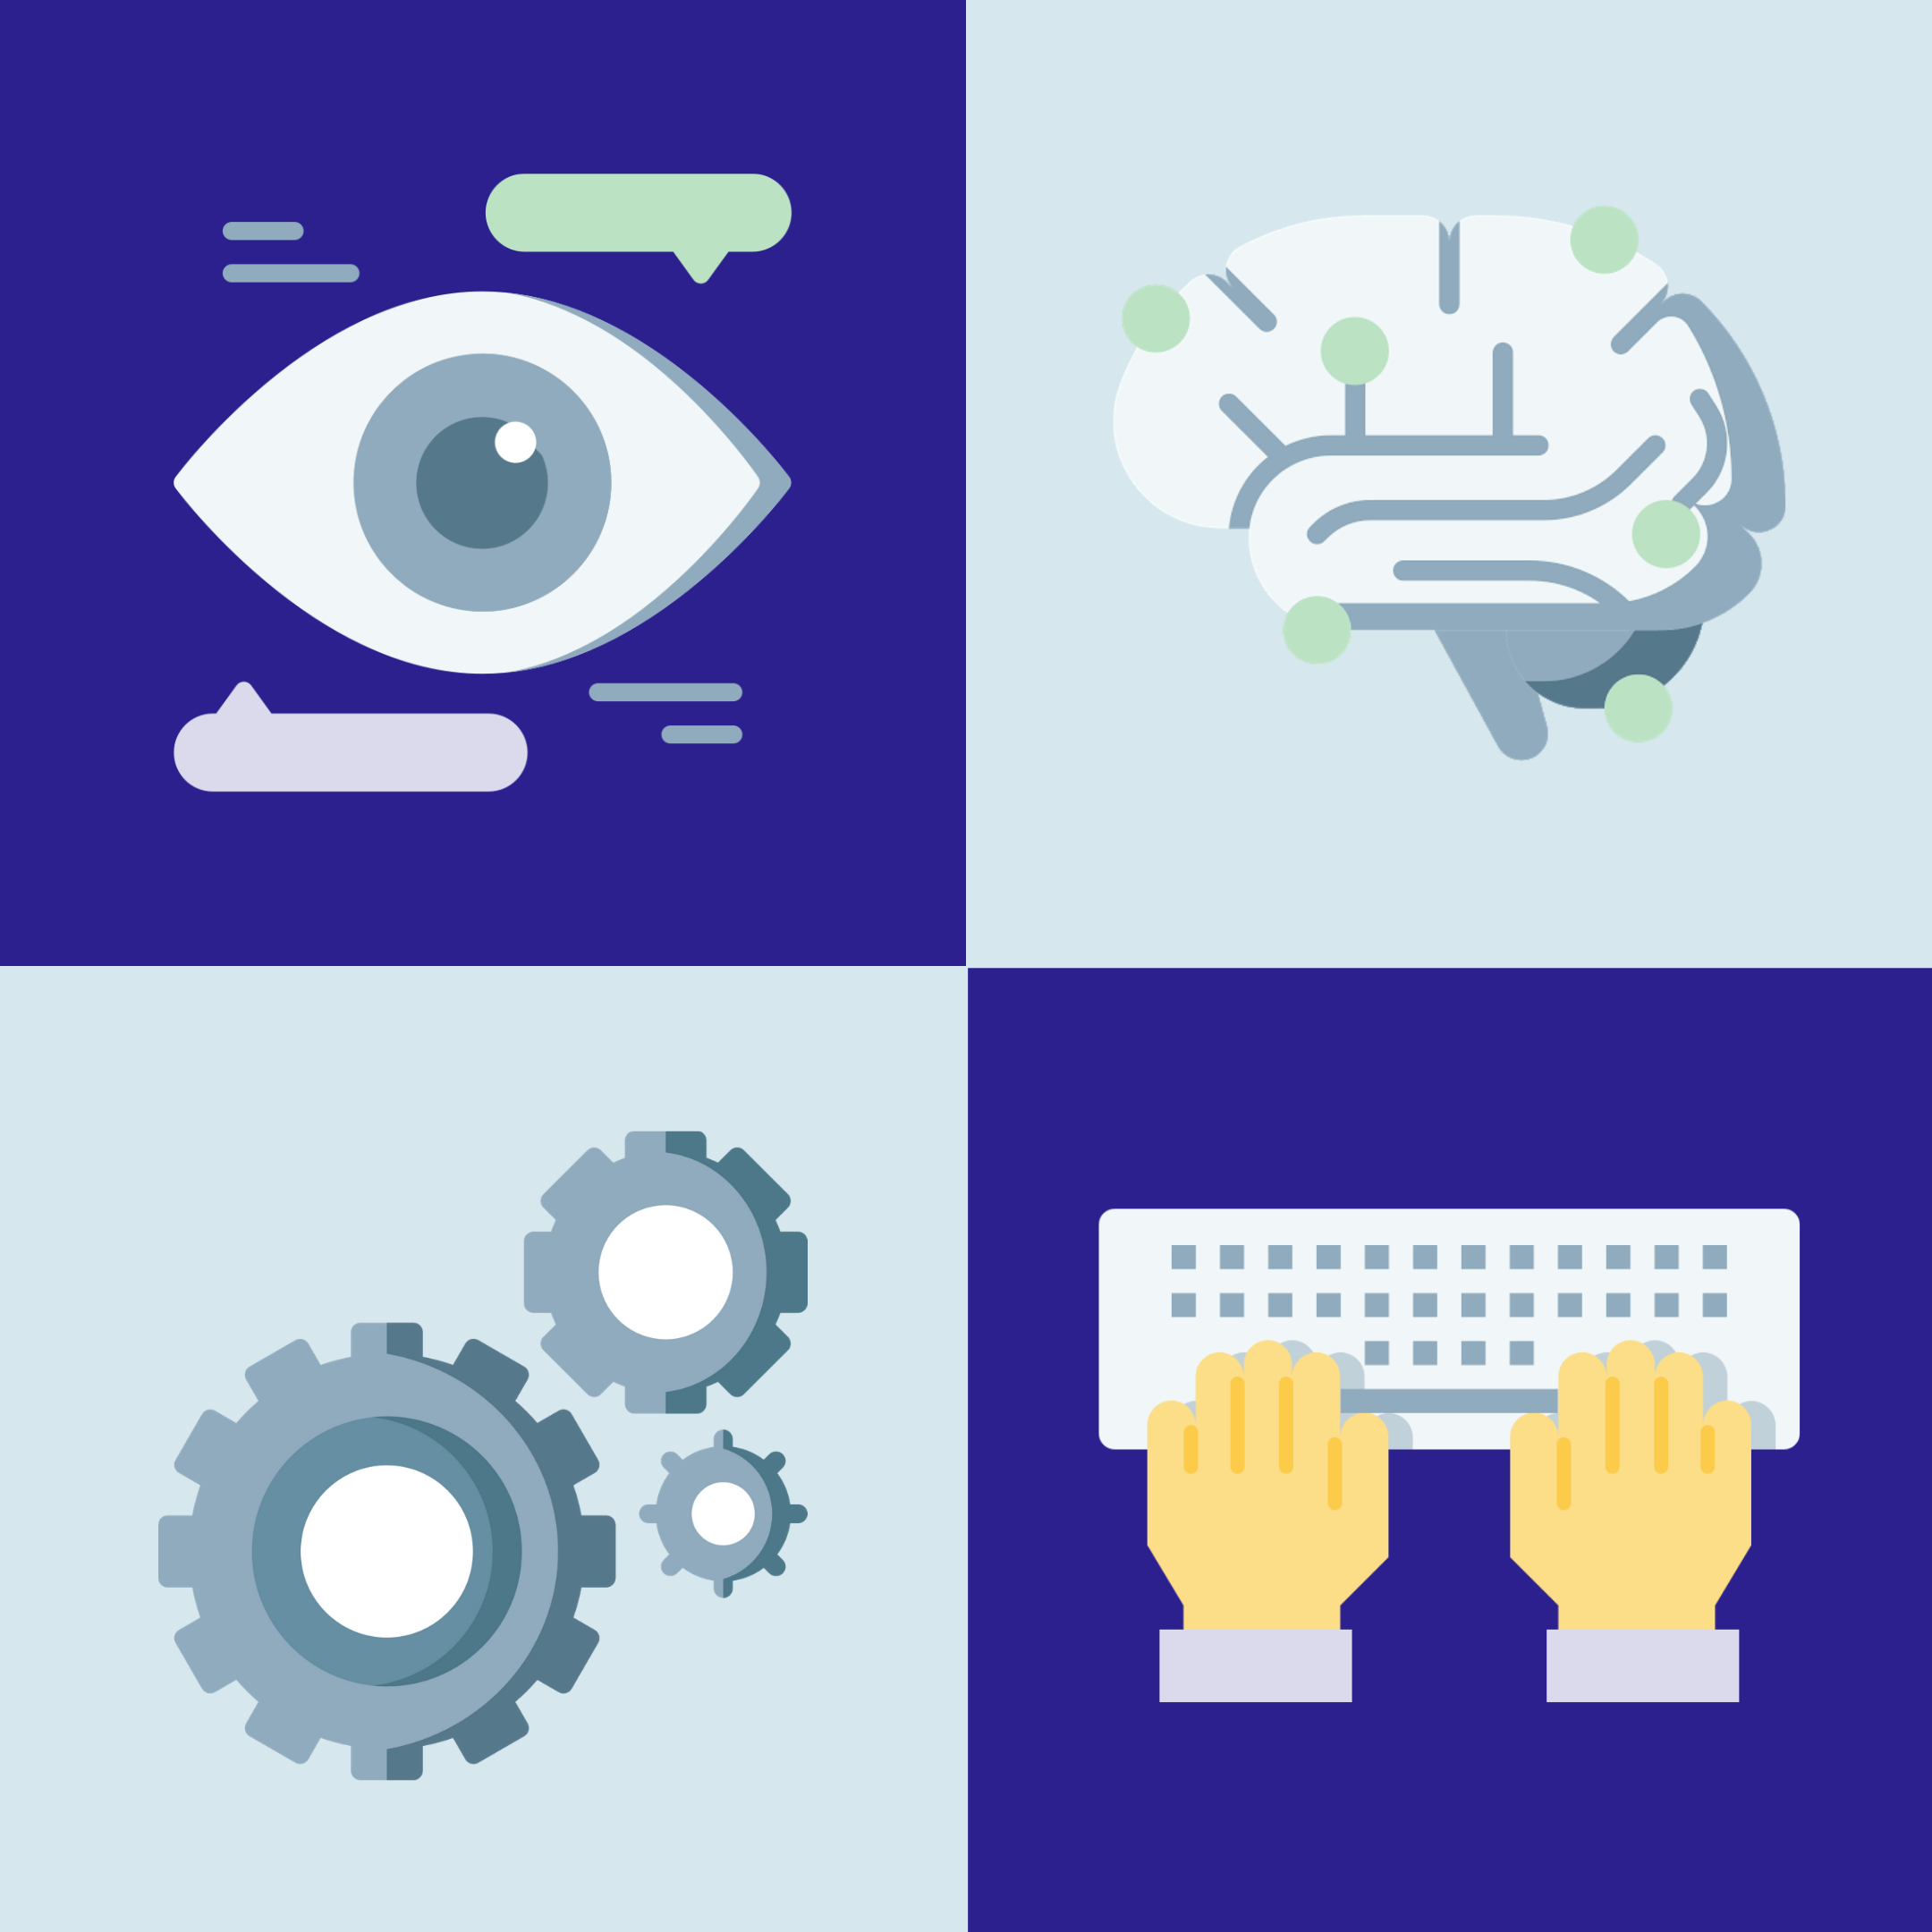 4 icons: an eye with text bubbles above and below it, a brain, a set of gears, and two hands using a keyboard.